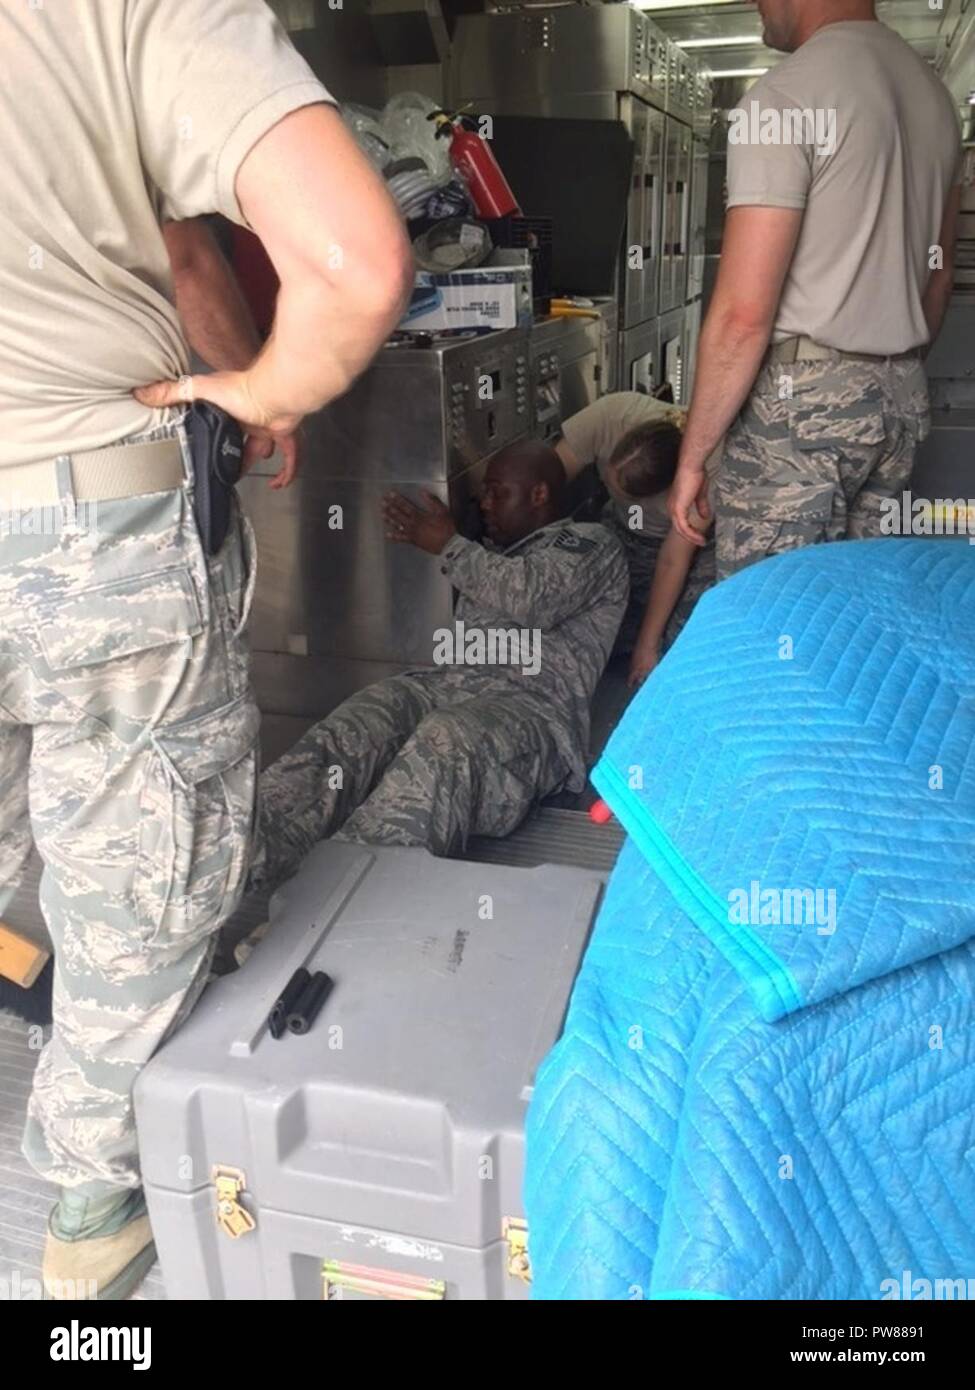 The 179th Airlift Wing along with Airmen from the 178th Wing, Springfield, Ohio, respond to relief efforts needed in Puerto Rico October 4, 2017. The 179th AW sends one of its C-130H Hercules loaded with a Disaster Relief Mobile Kitchen Trailer (DRMKT) with services Airmen from both units. Airmen from both units will use the extremely flexible DRMKT, which supports virtually any field-feeding scenario, form quickly prepared boil-in-the-bag meals to restaurant-quality meals for up to 1,000 people in under 90 minutes. The 179th AW is always ready to respond with a team of trusted Airmen for stat Stock Photo